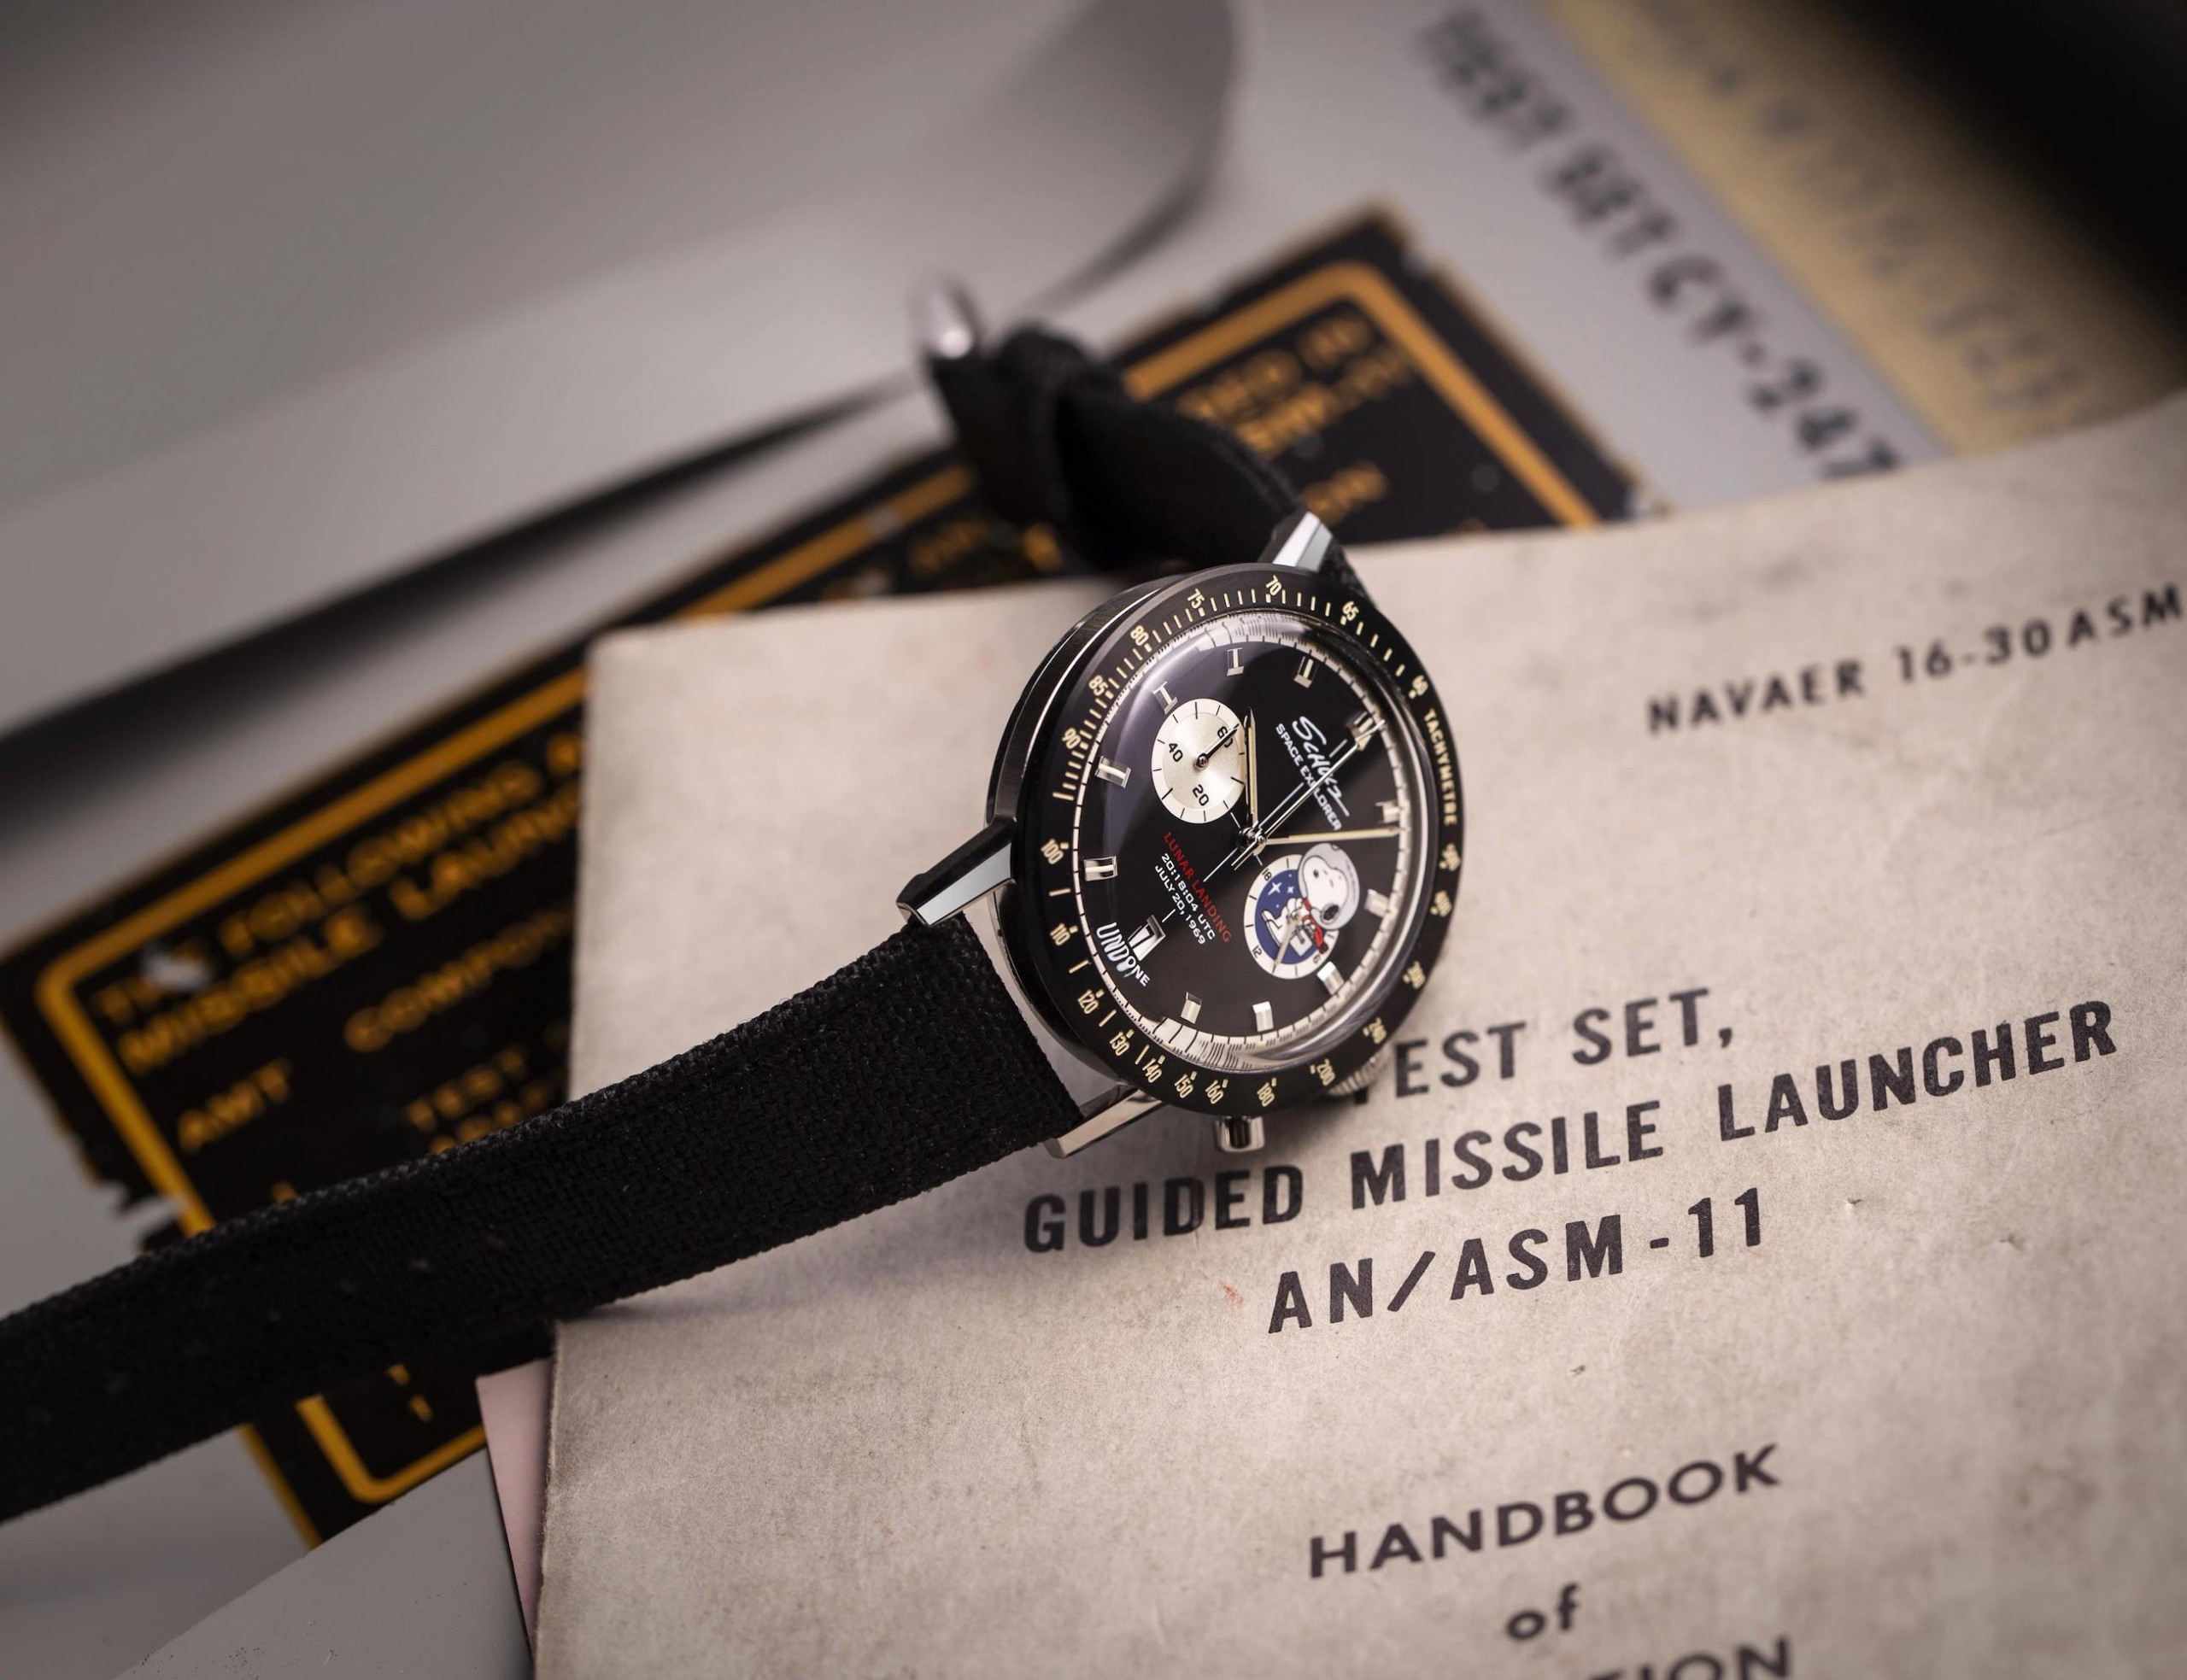 Undone LUNAR MISSION Apollo Tribute Watches pay homage to space exploration